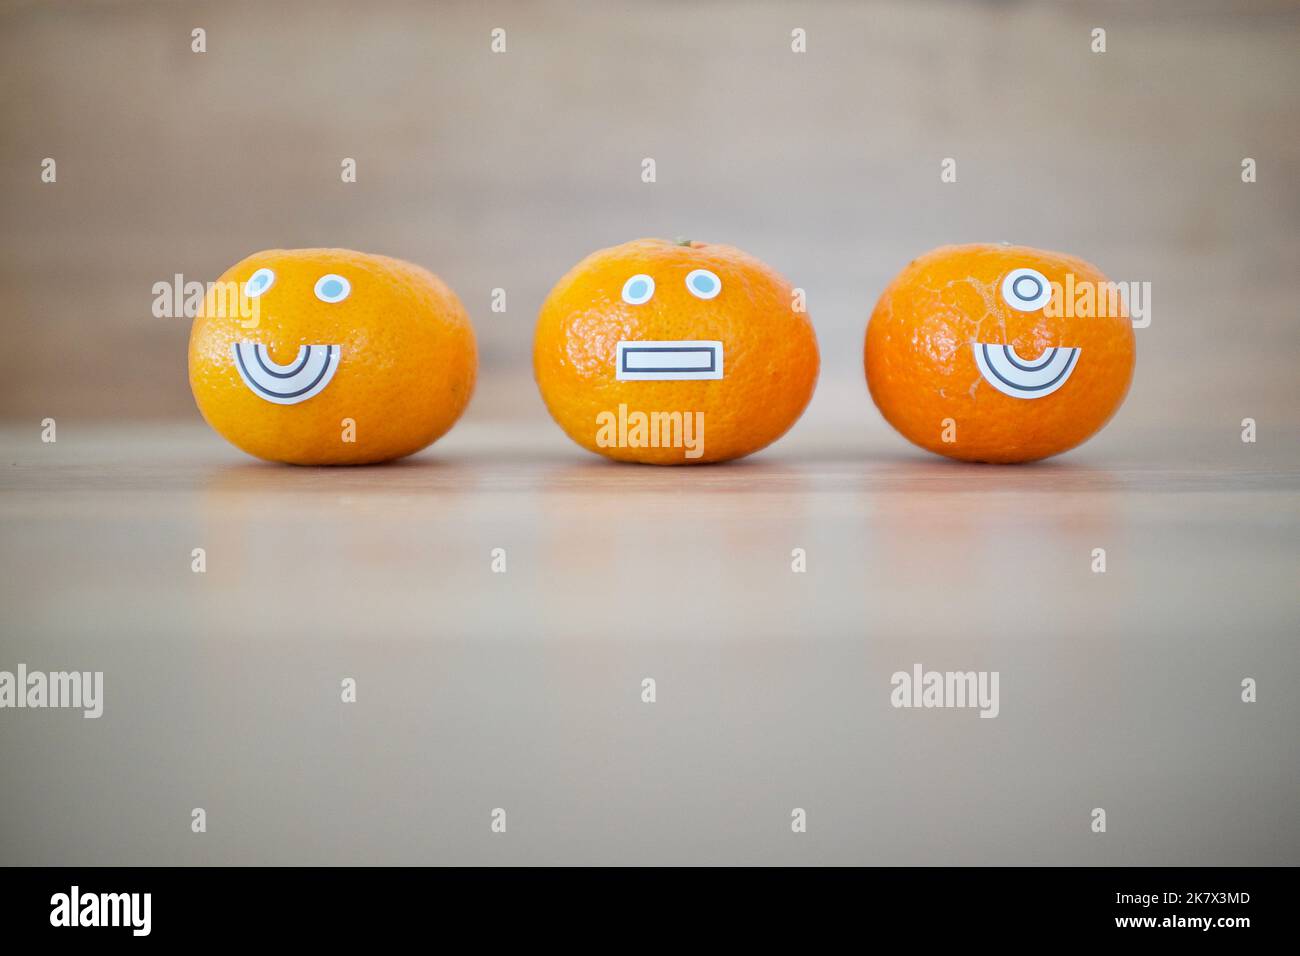 3 mandarines with facial expressions. There is a smiley face, one dumb face, and one with a smiley face with only one eye. Stock Photo